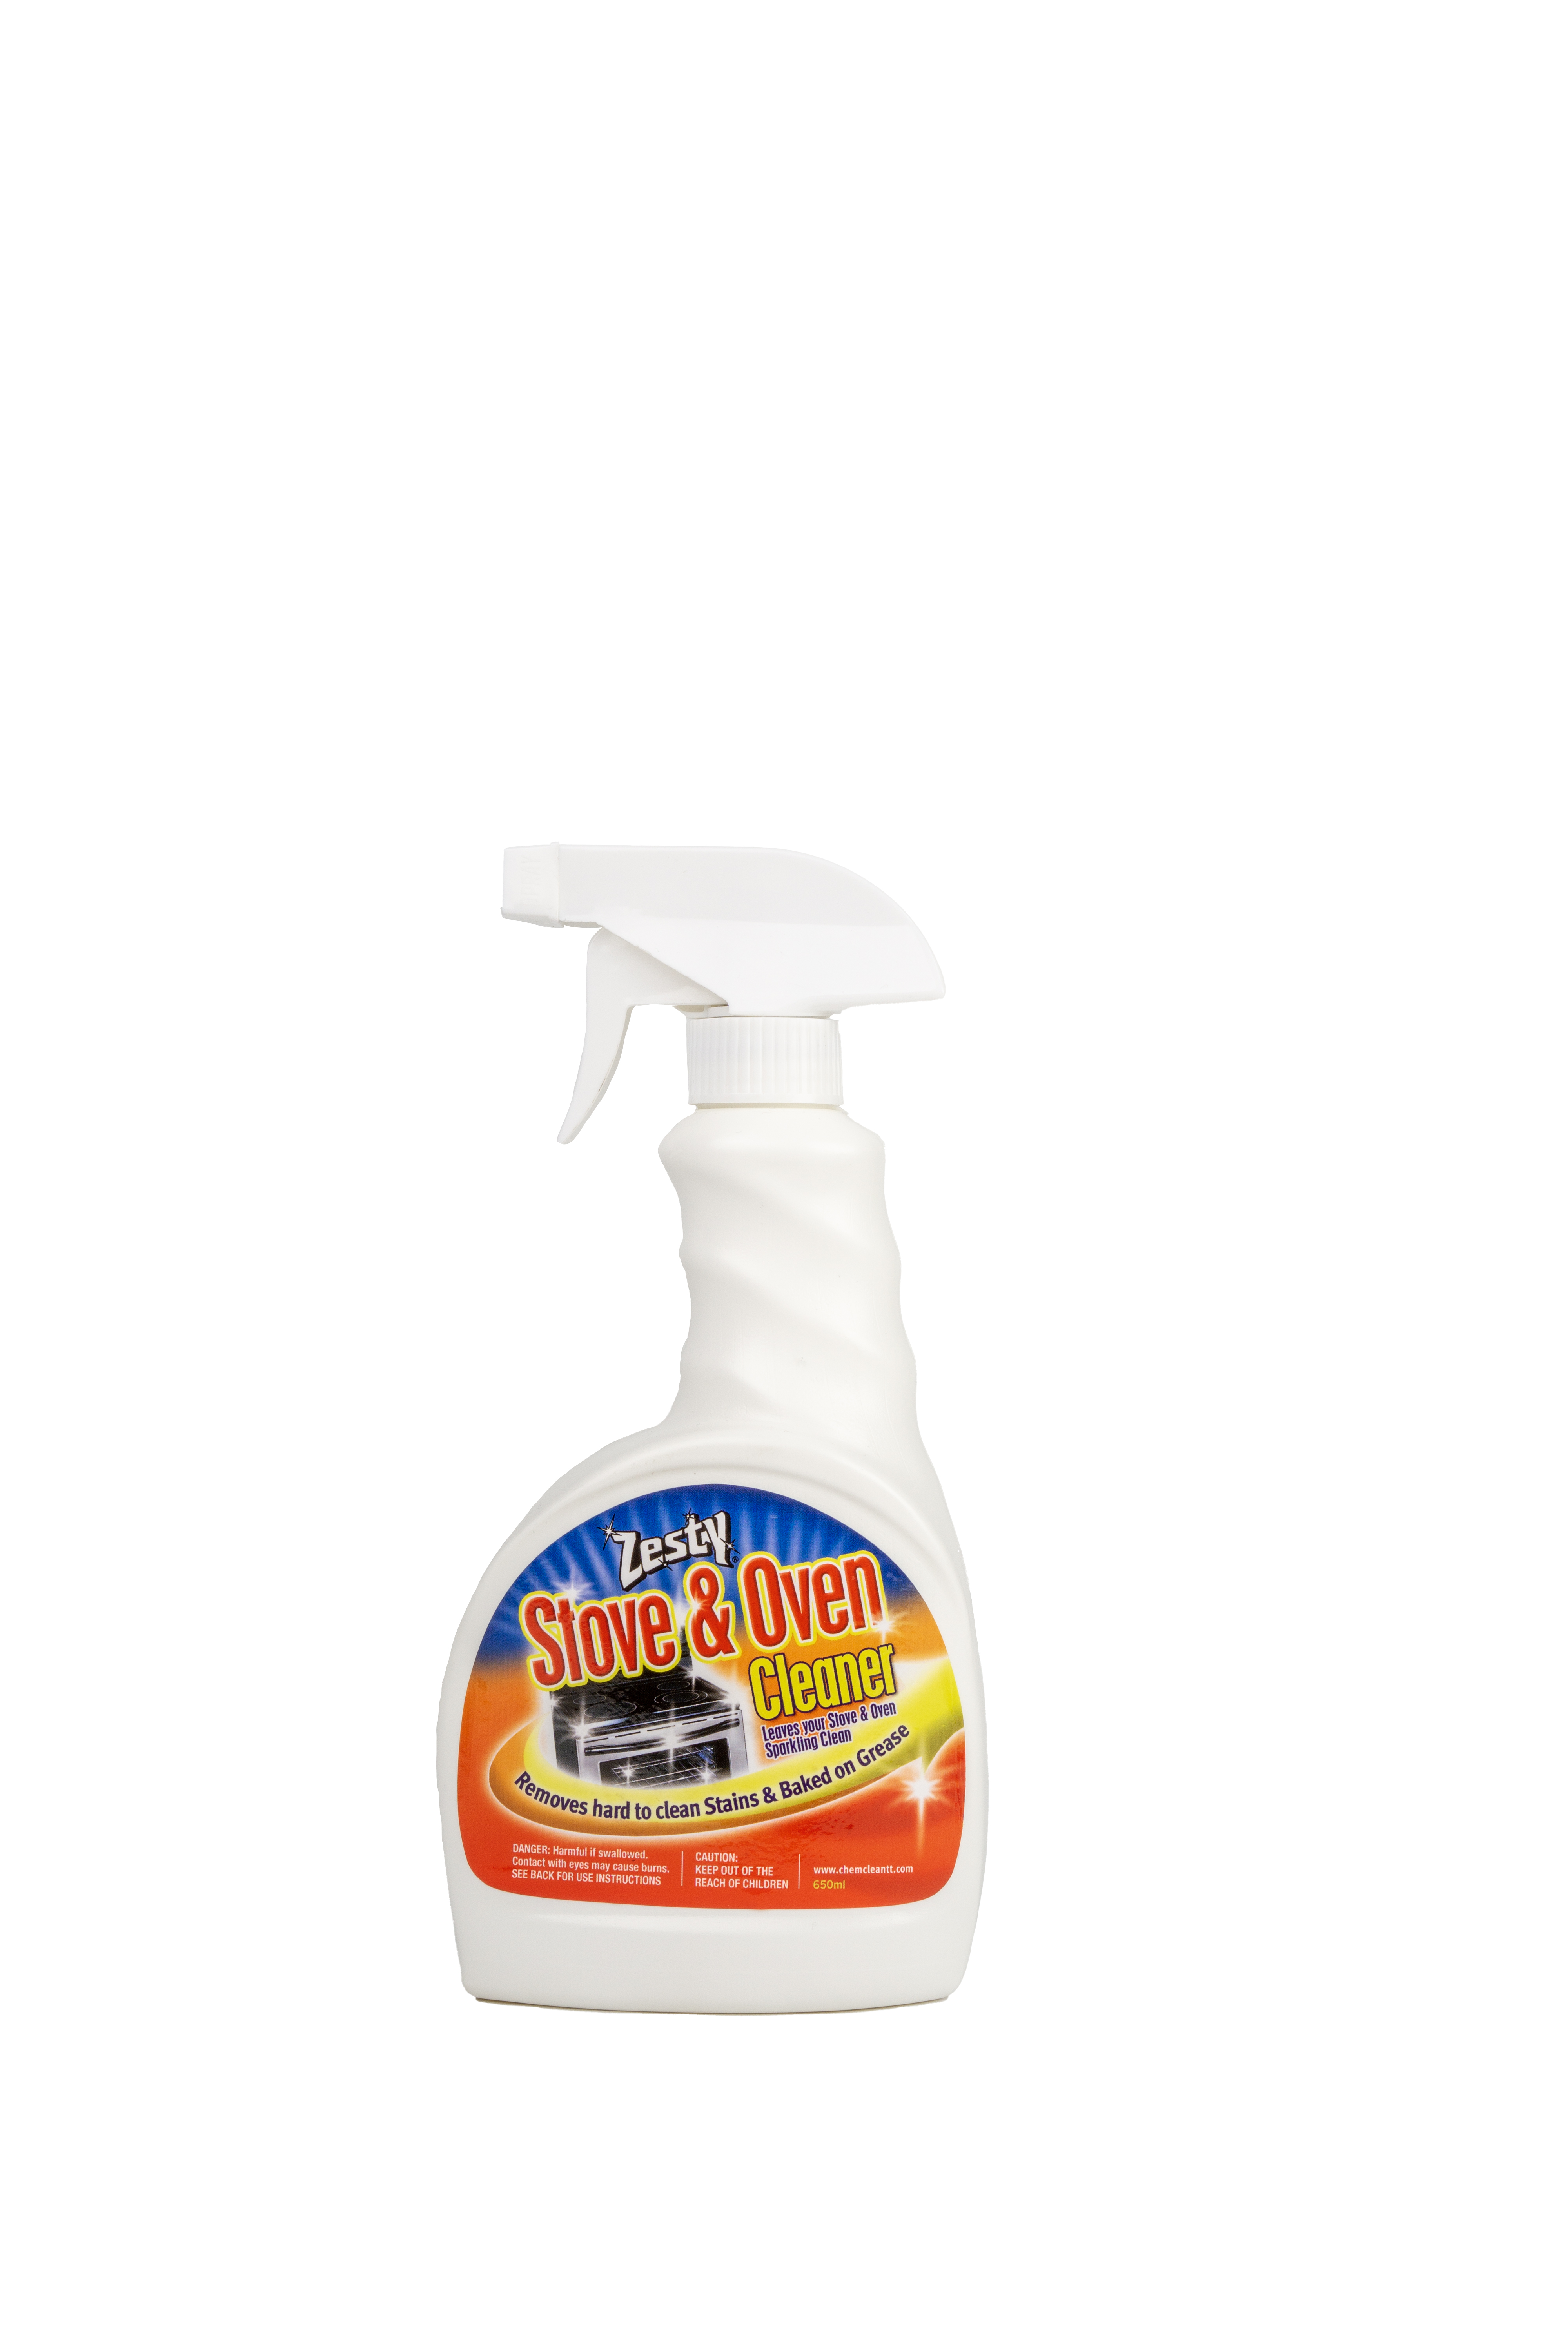 Zesty Stove & Over Cleaners